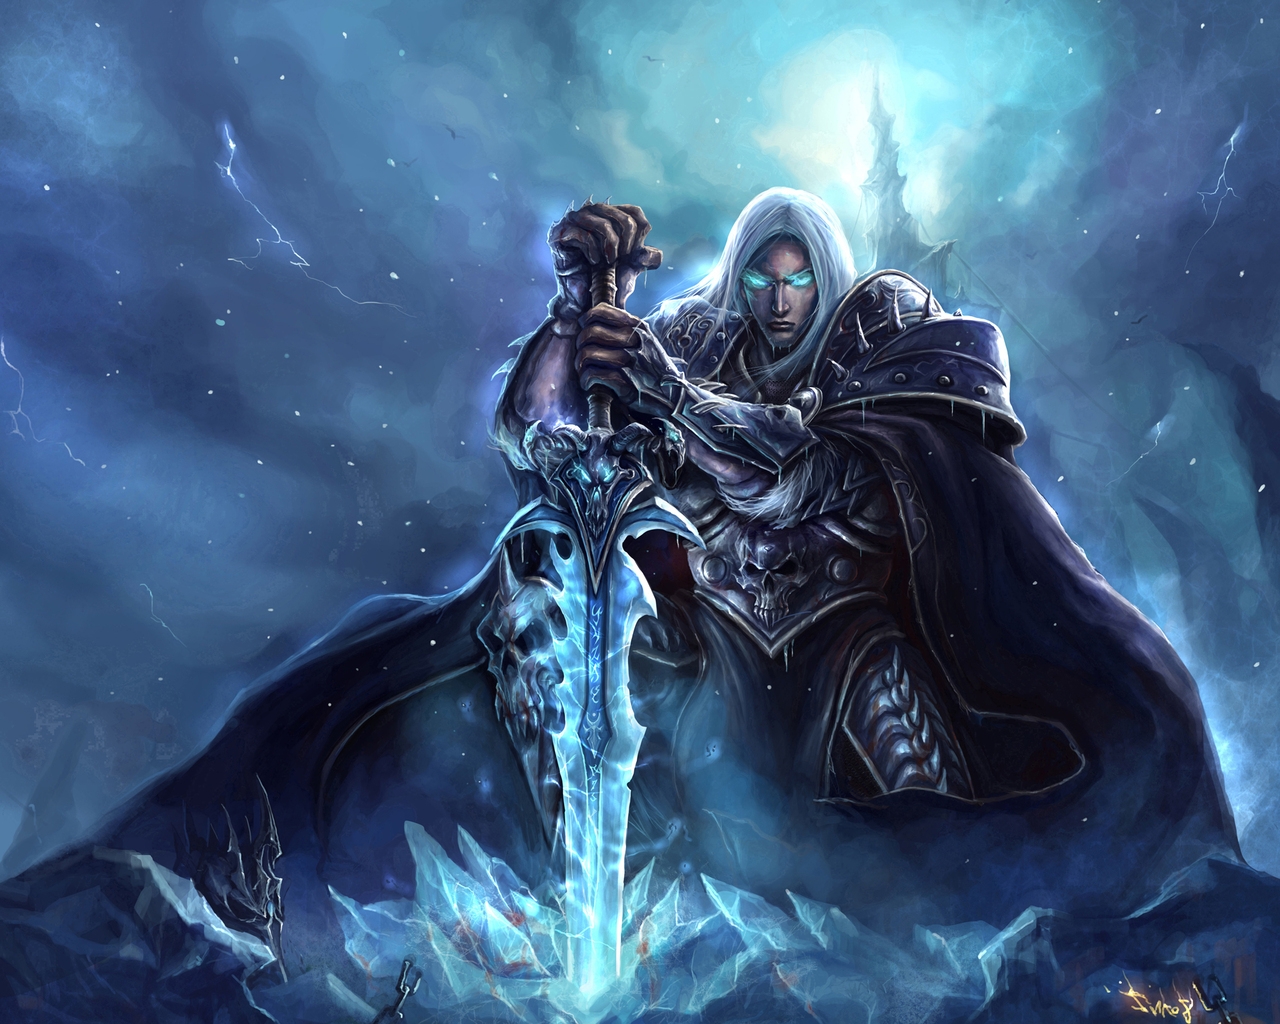 World of Warcraft Lich King Art for 1280 x 1024 resolution